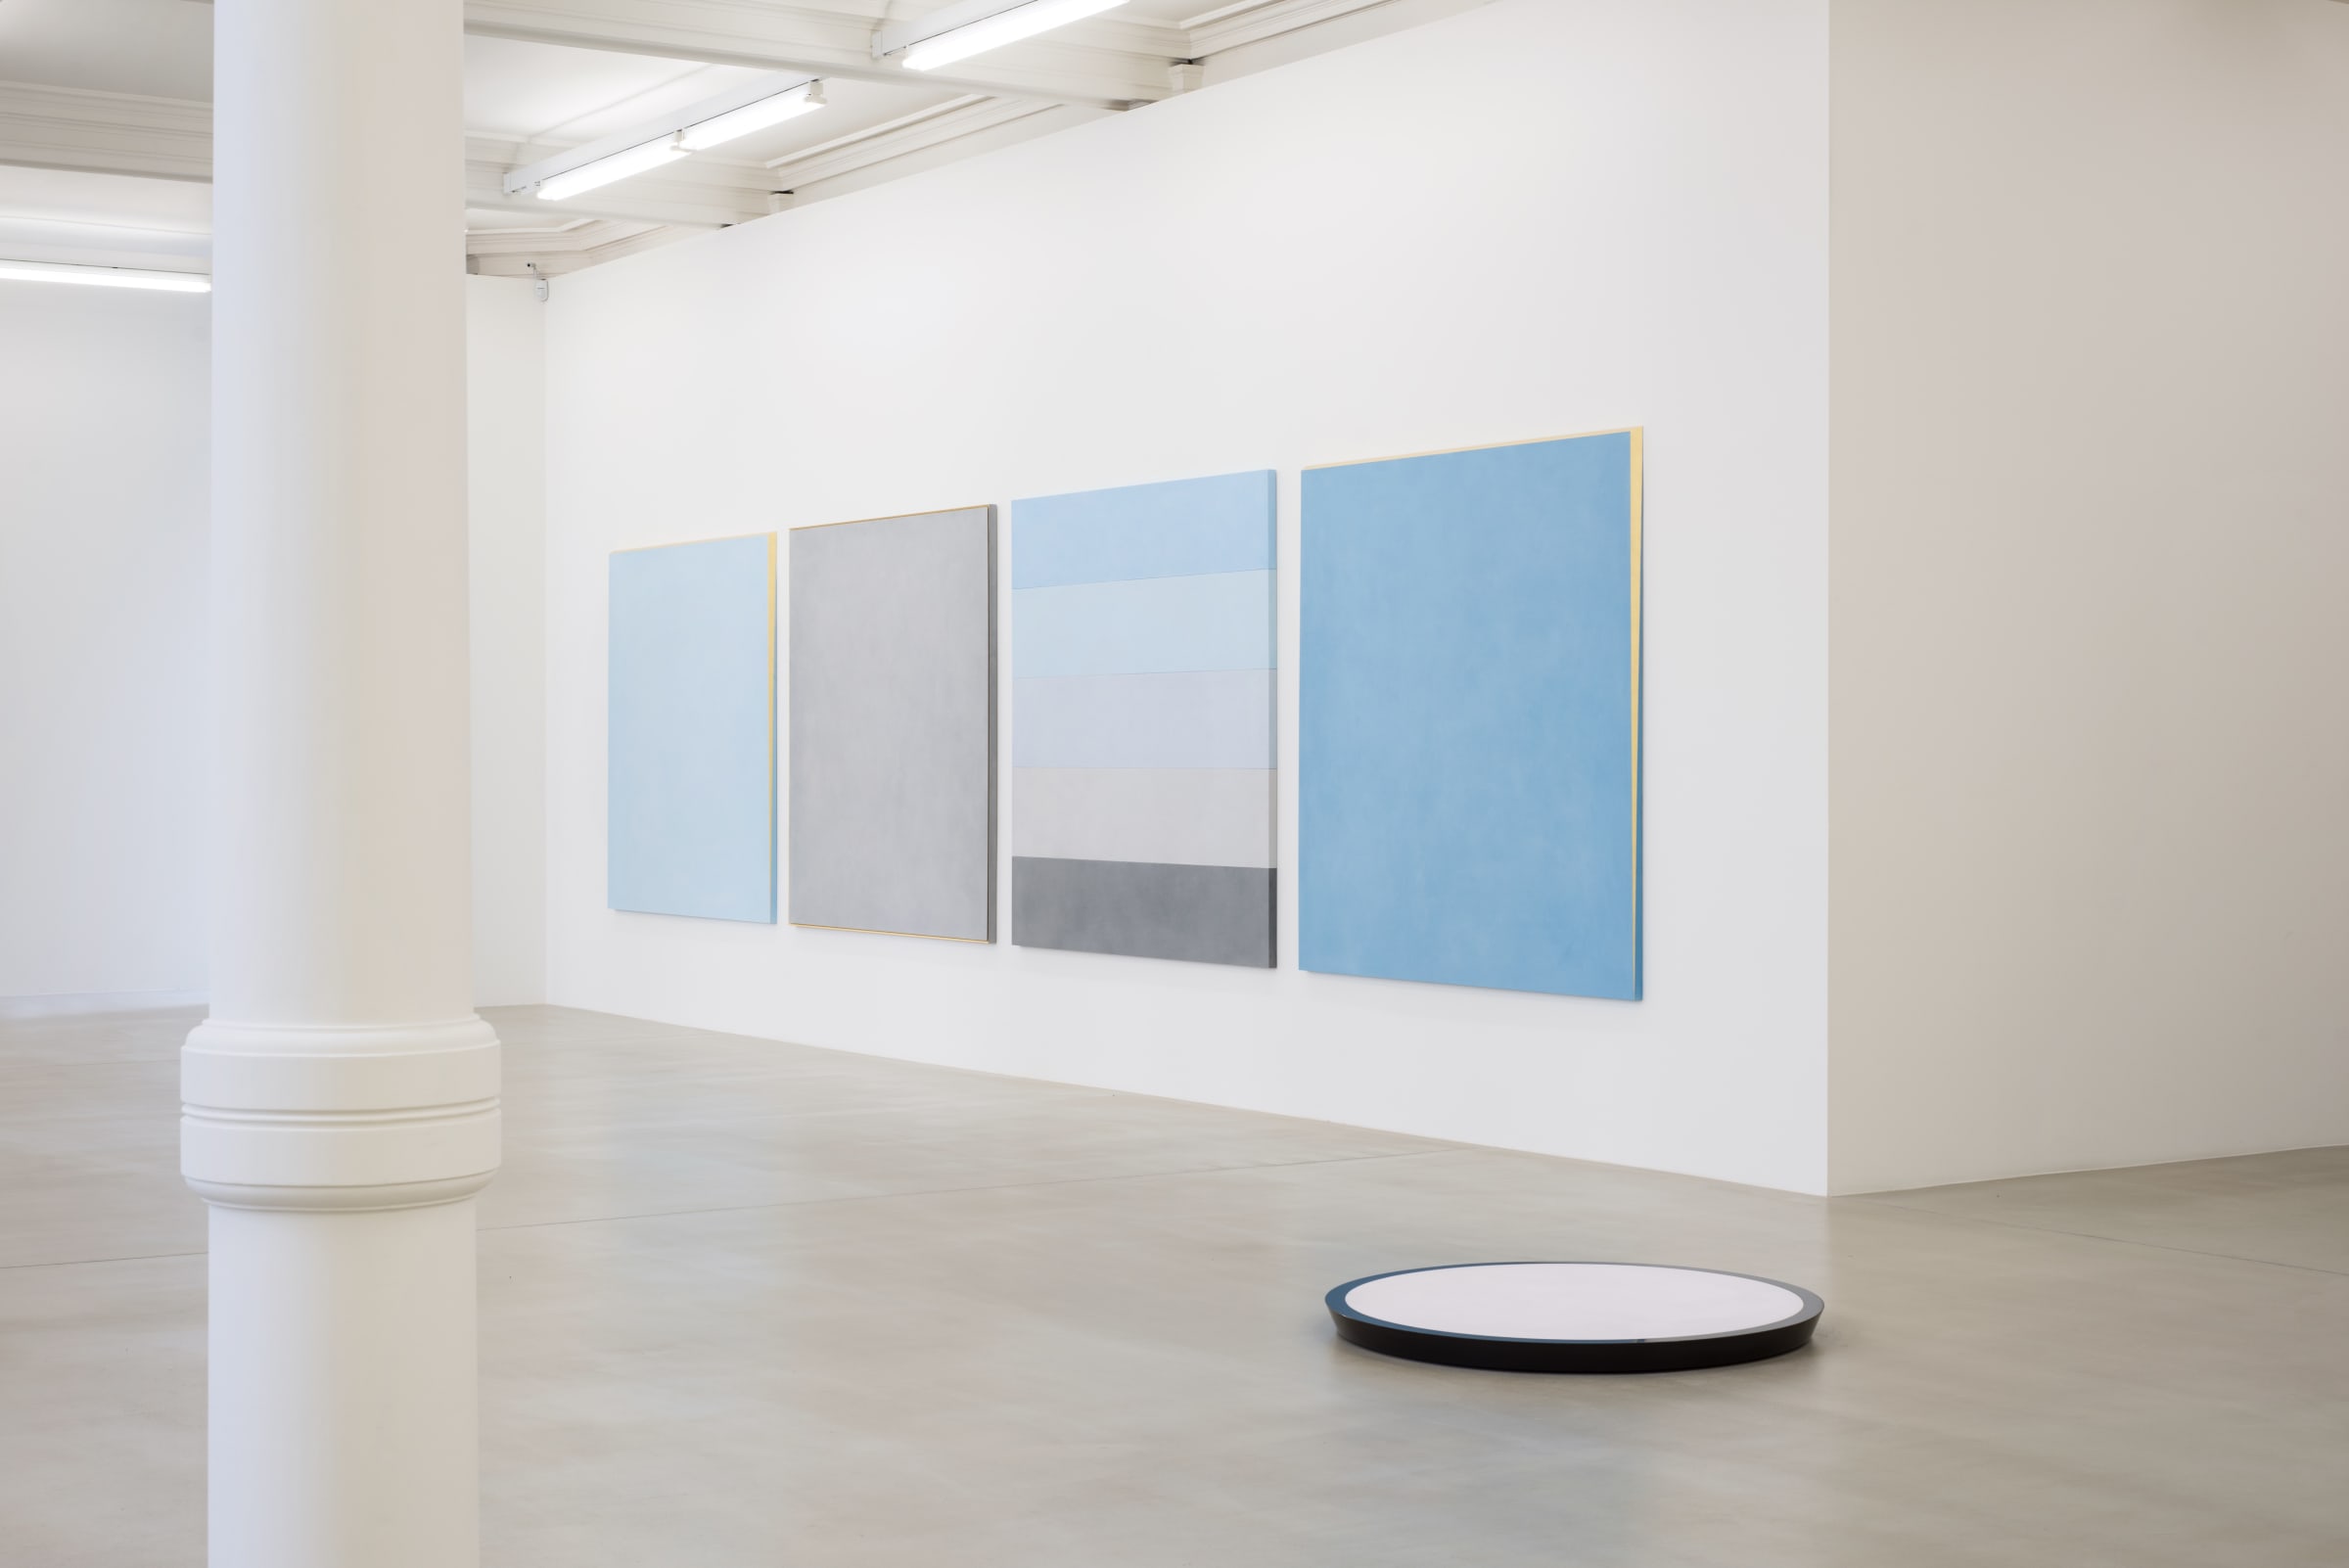 Four paintings hang on a white wall. From the left: solid light blue with gold framing, solid light gray with gold framing, 5 strips: light blue, lighter blue, light grey, grey,  darker grey, and finally, sky blue with gold framing.